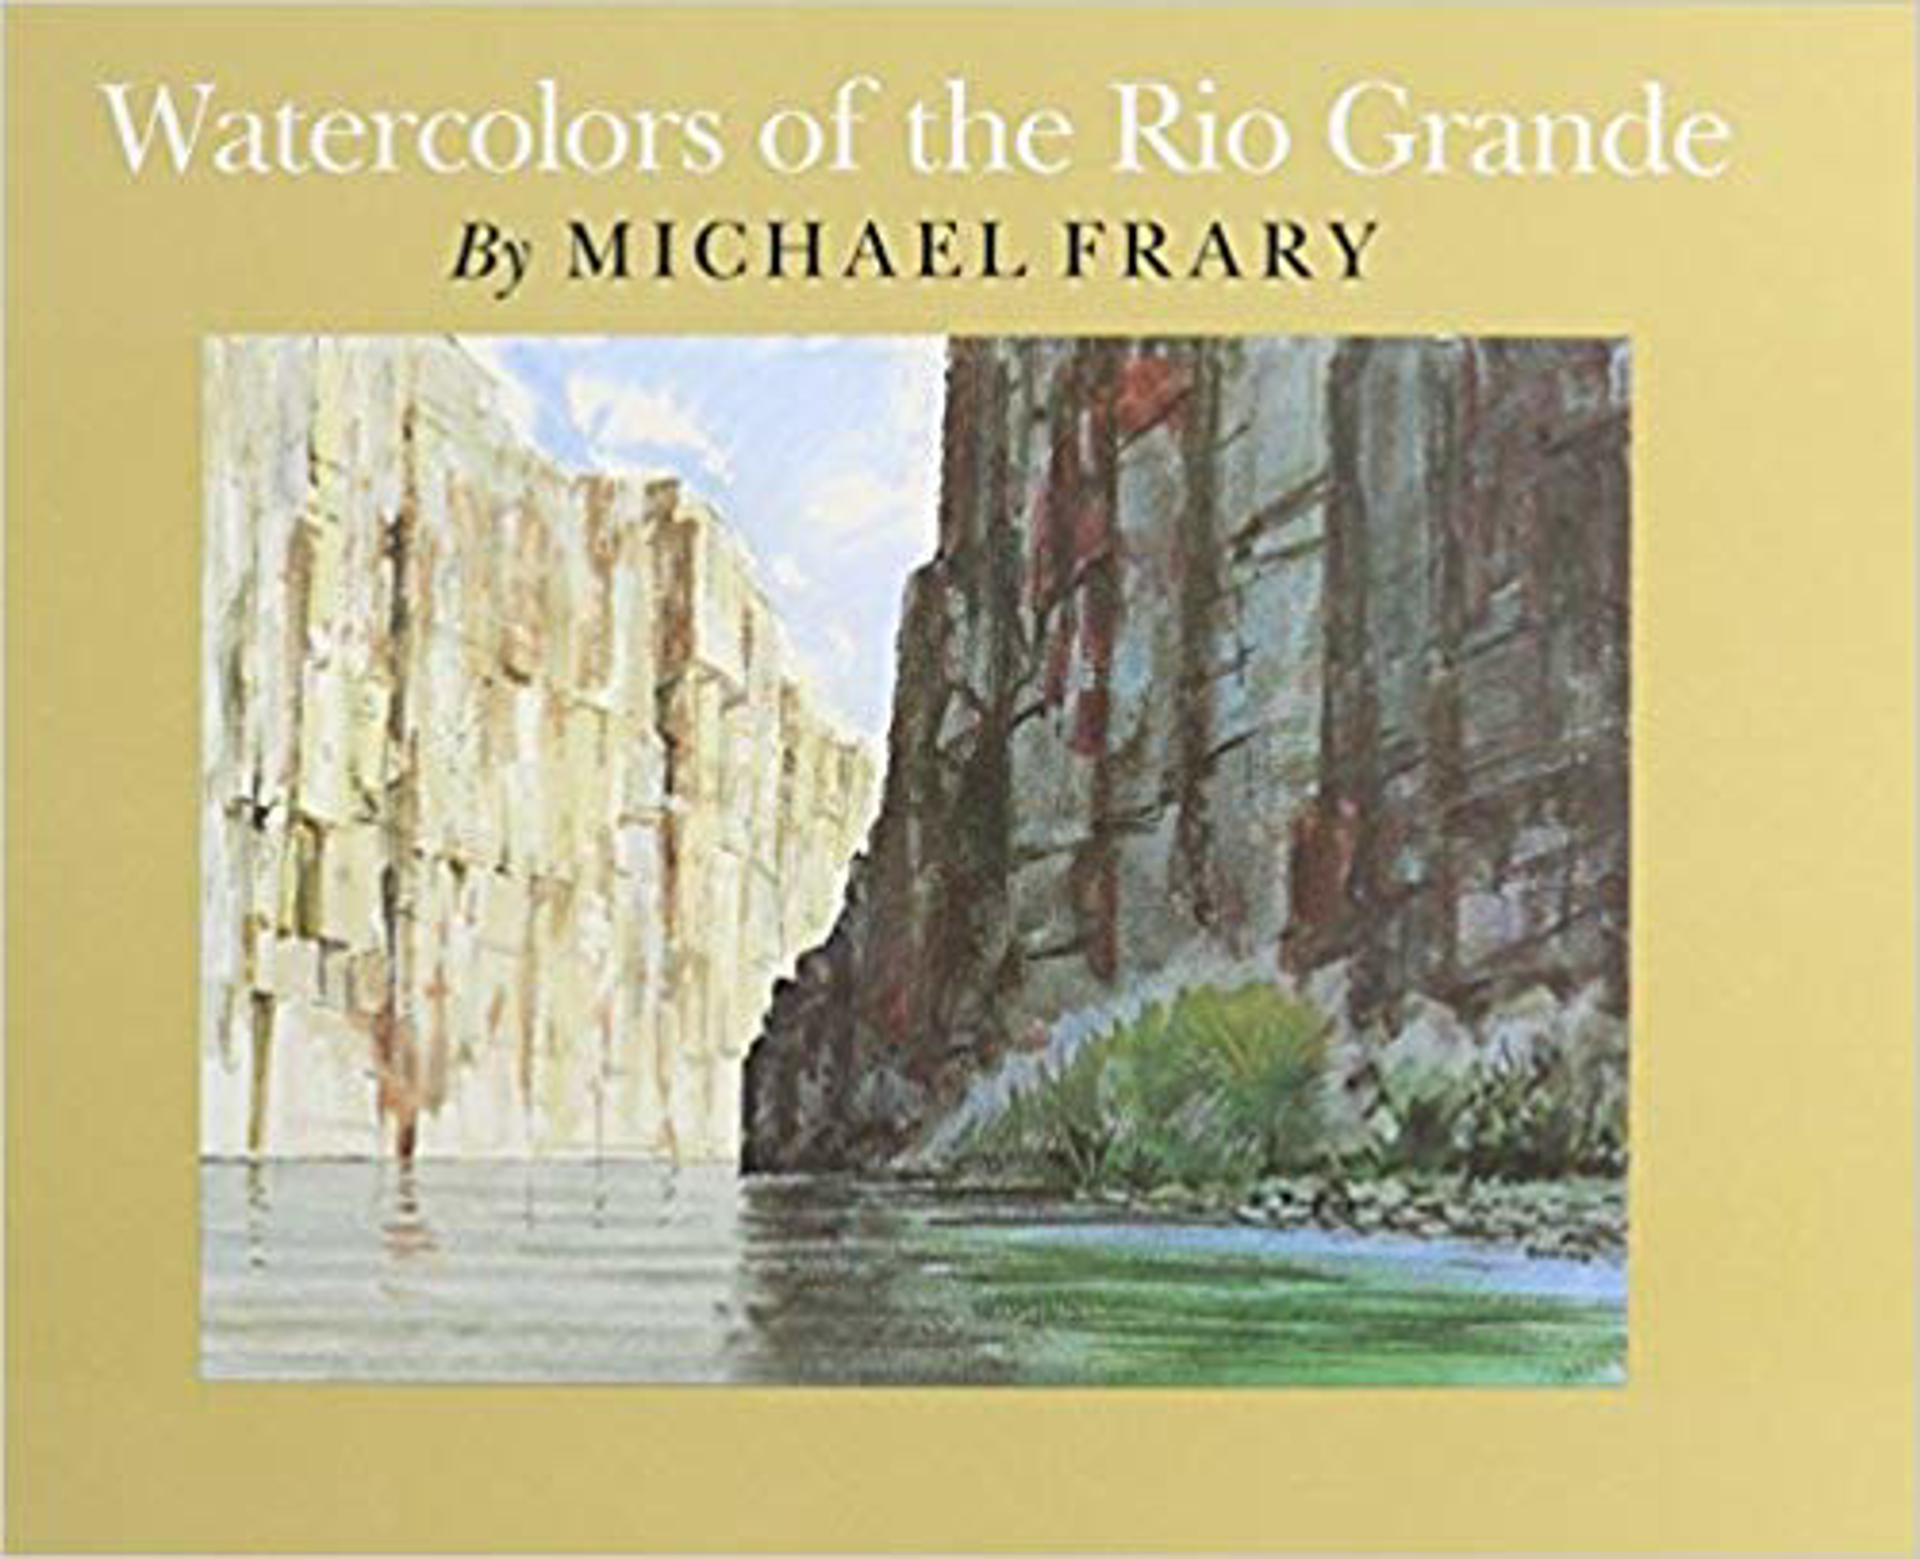 Watercolors of the Rio Grande by Michael Frary by Publications